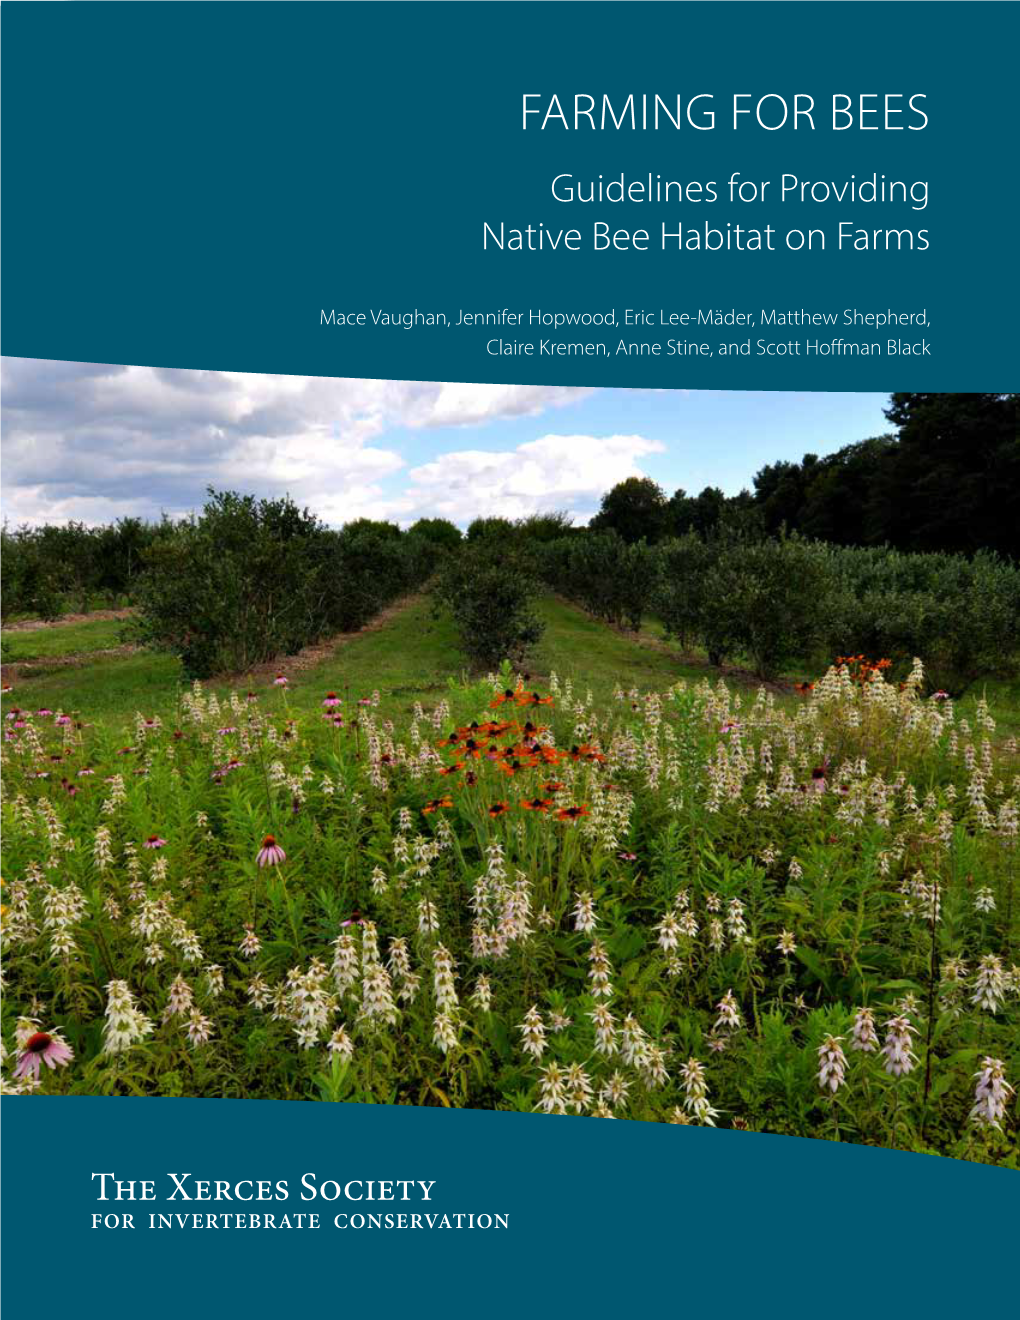 Guidelines for Providing Native Bee Habitat on Farms